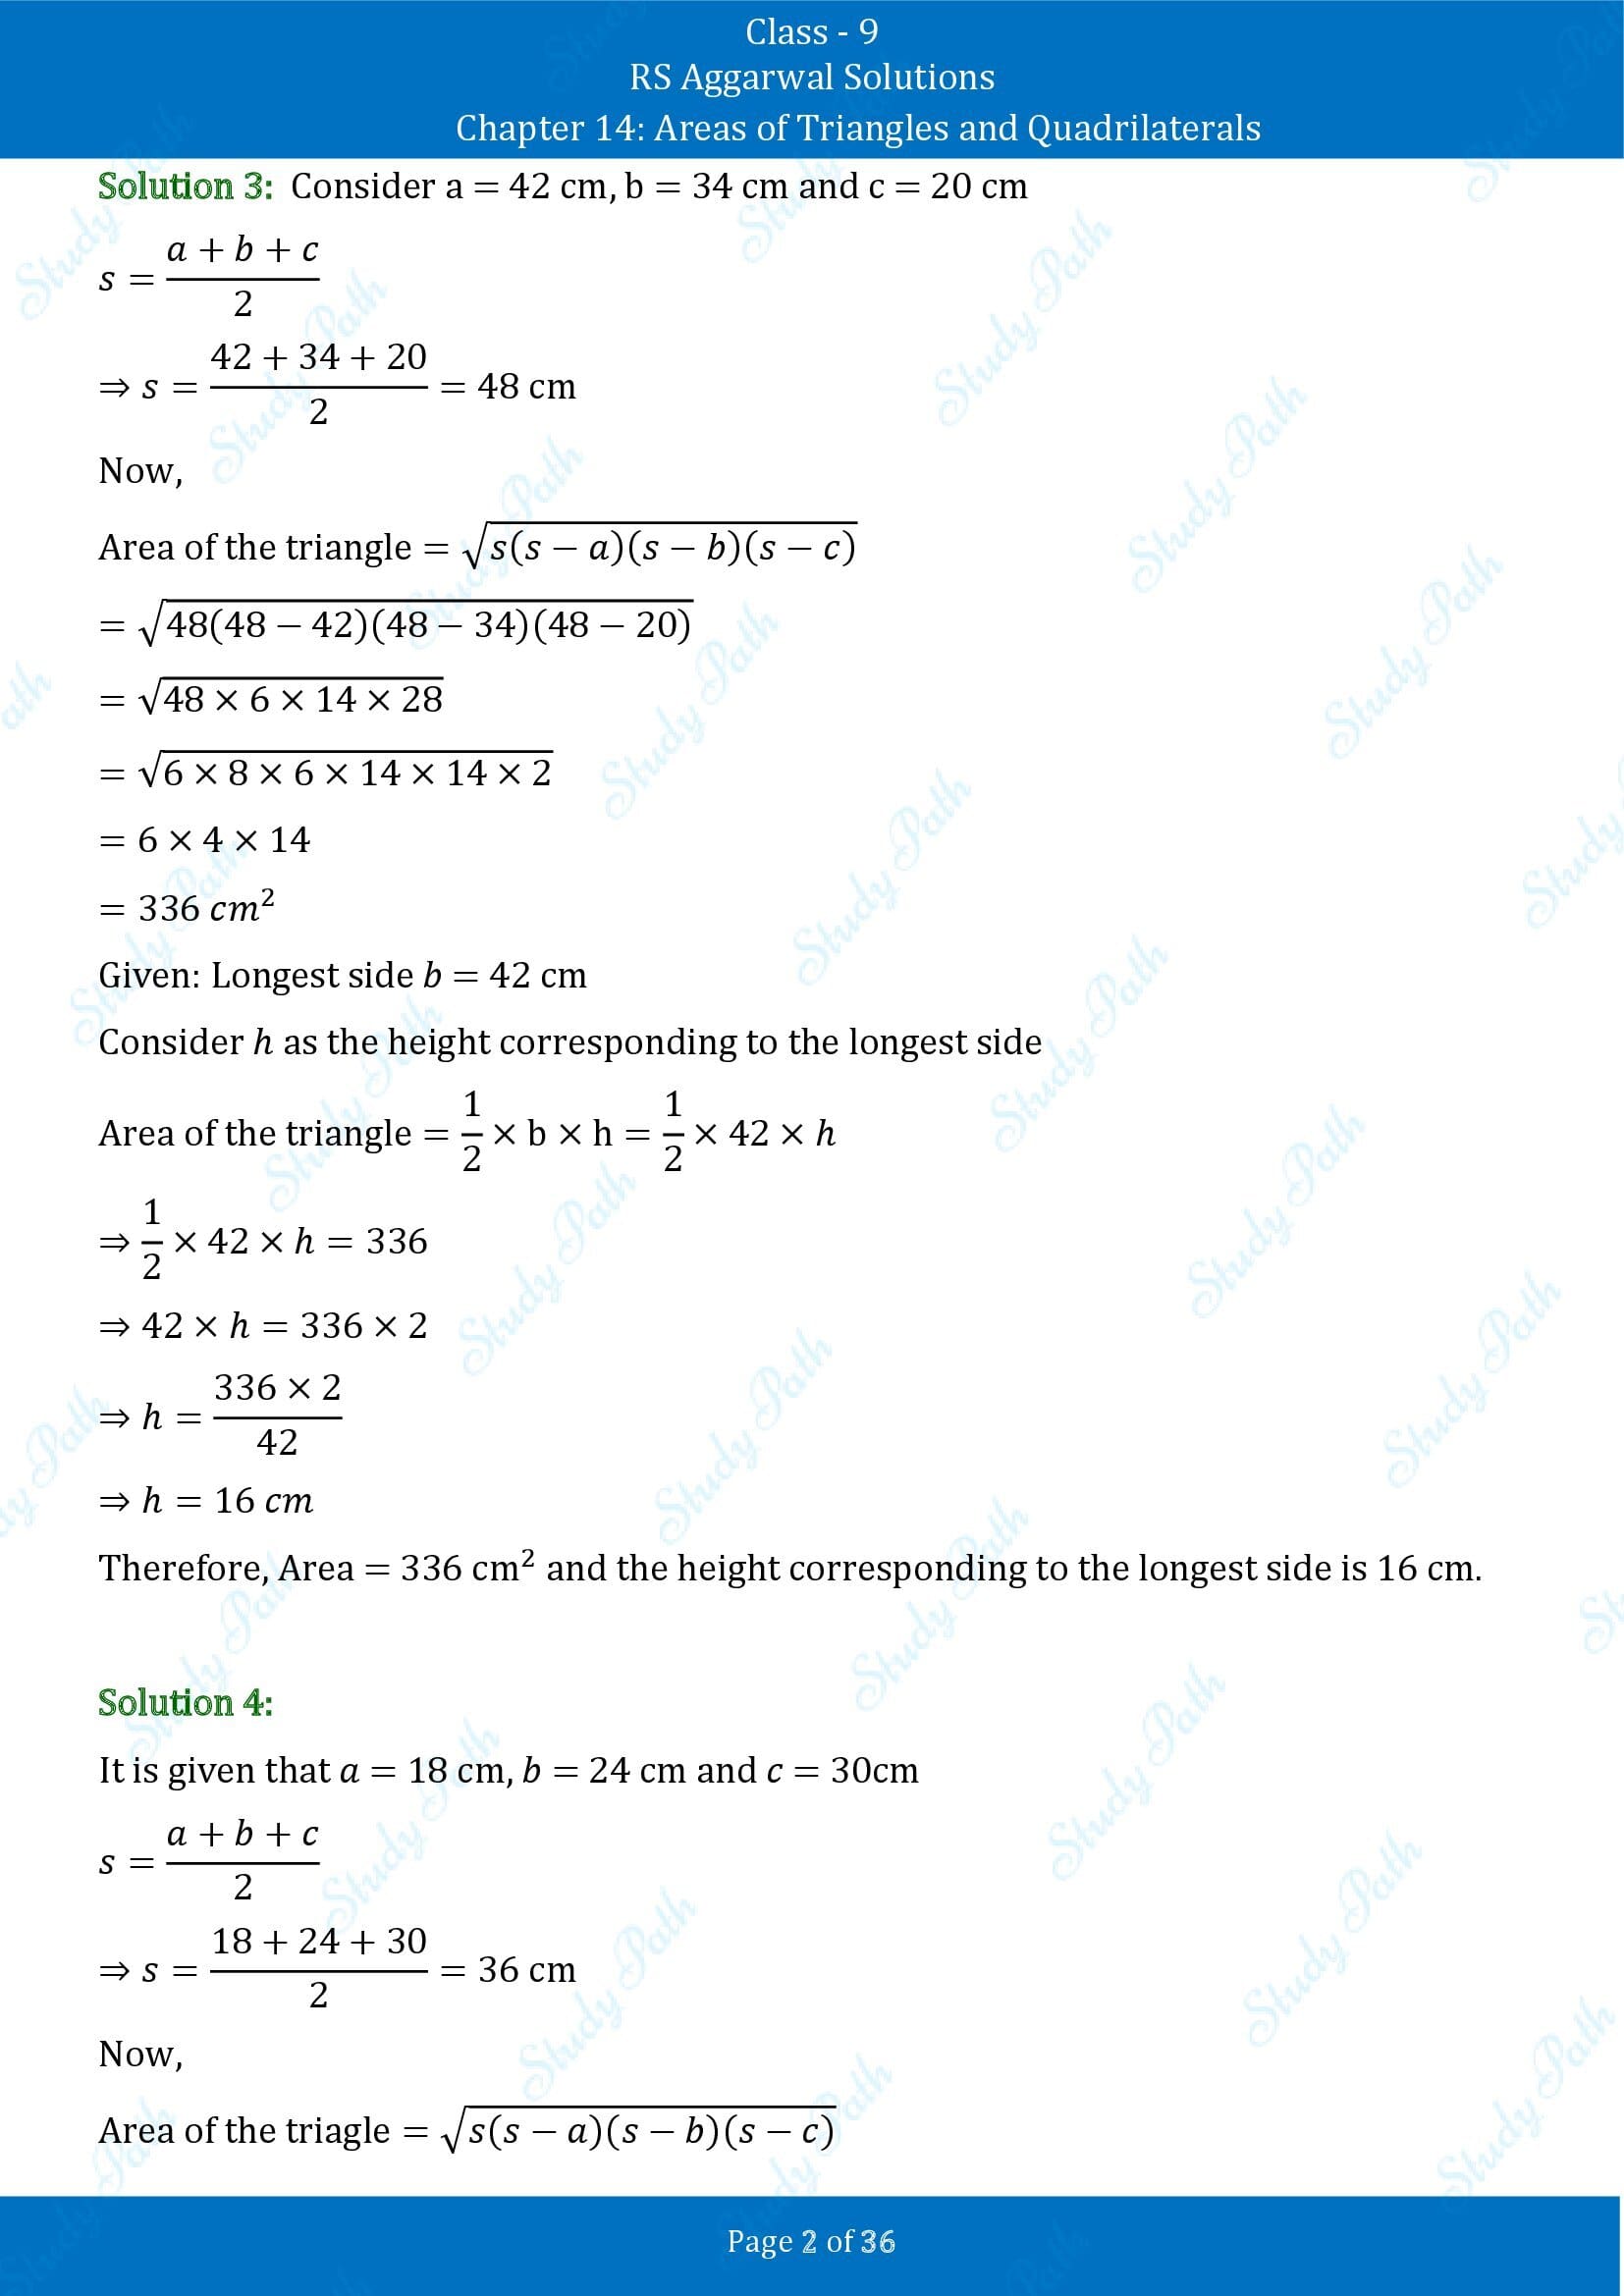 RS Aggarwal Solutions Class 9 Chapter 14 Areas of Triangles and Quadrilaterals Exercise 14 00002